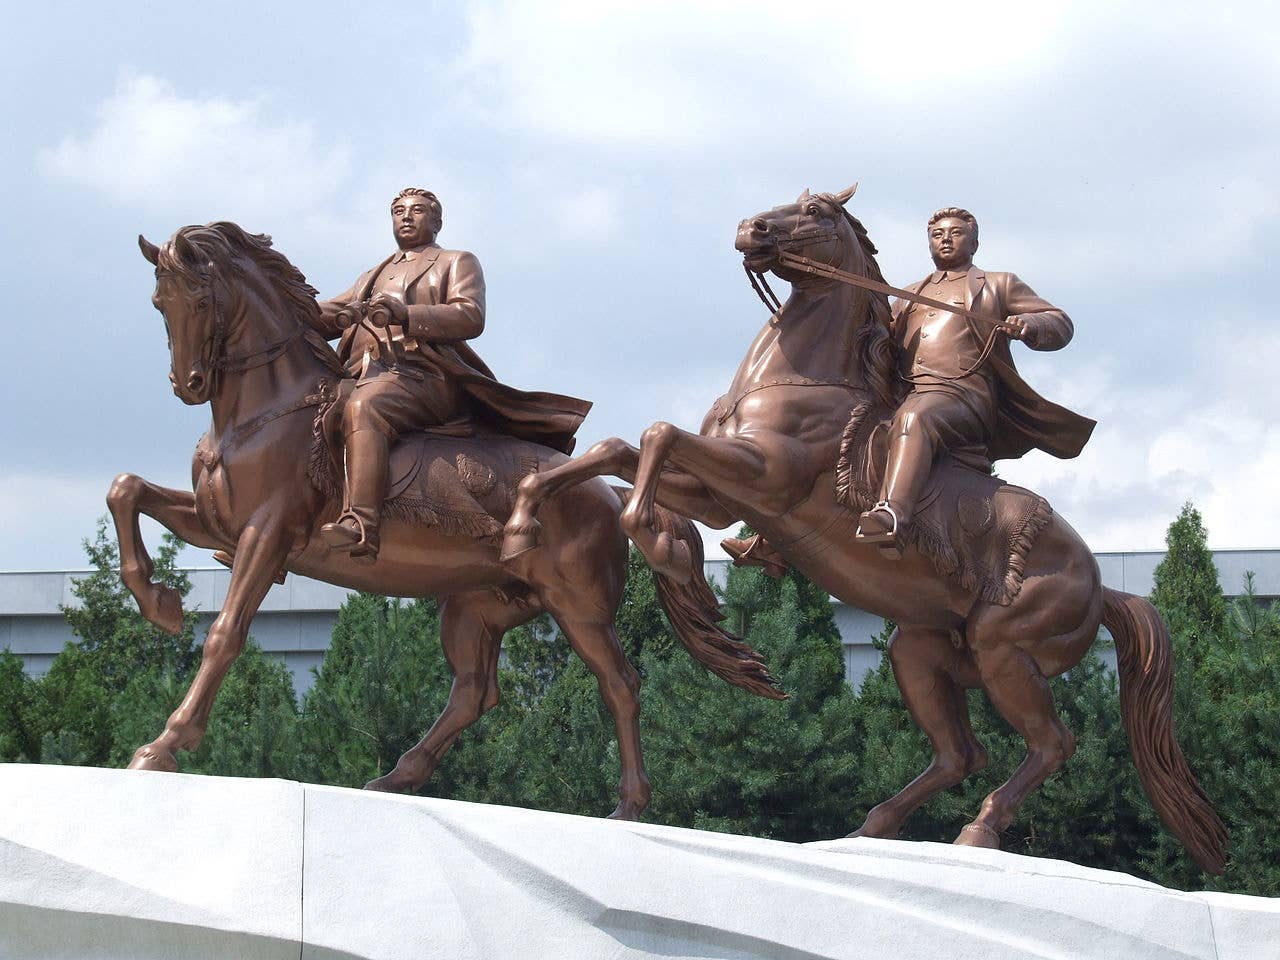 A grand statue located in Pyonyang of Kim Il Sung and Kim Jong Un riding steeds.